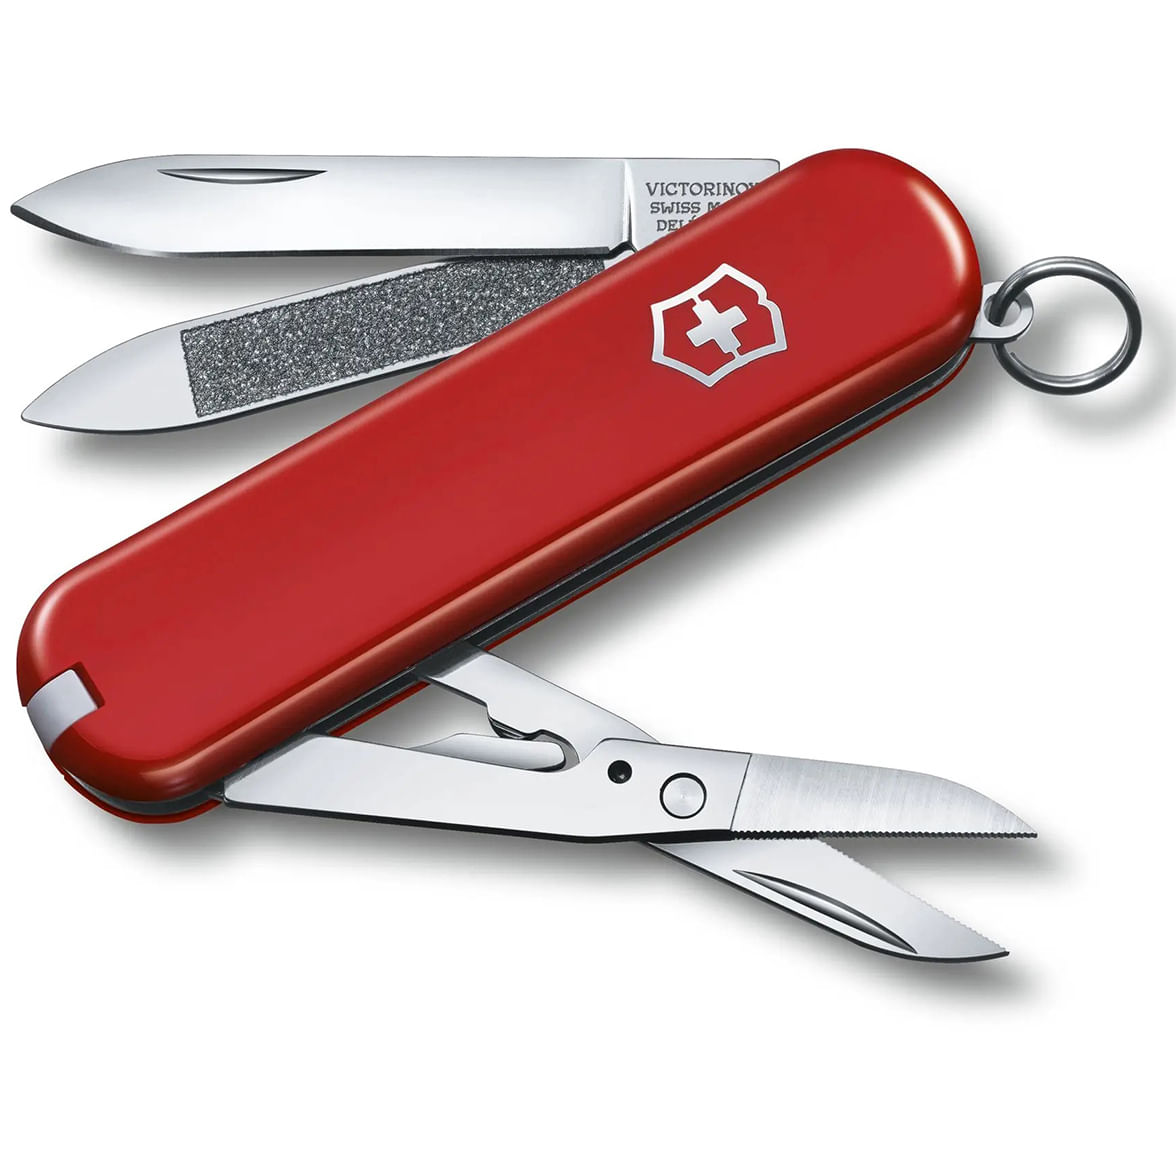 Shop All Victorinox Swiss Army At NYC's Best Sports Store